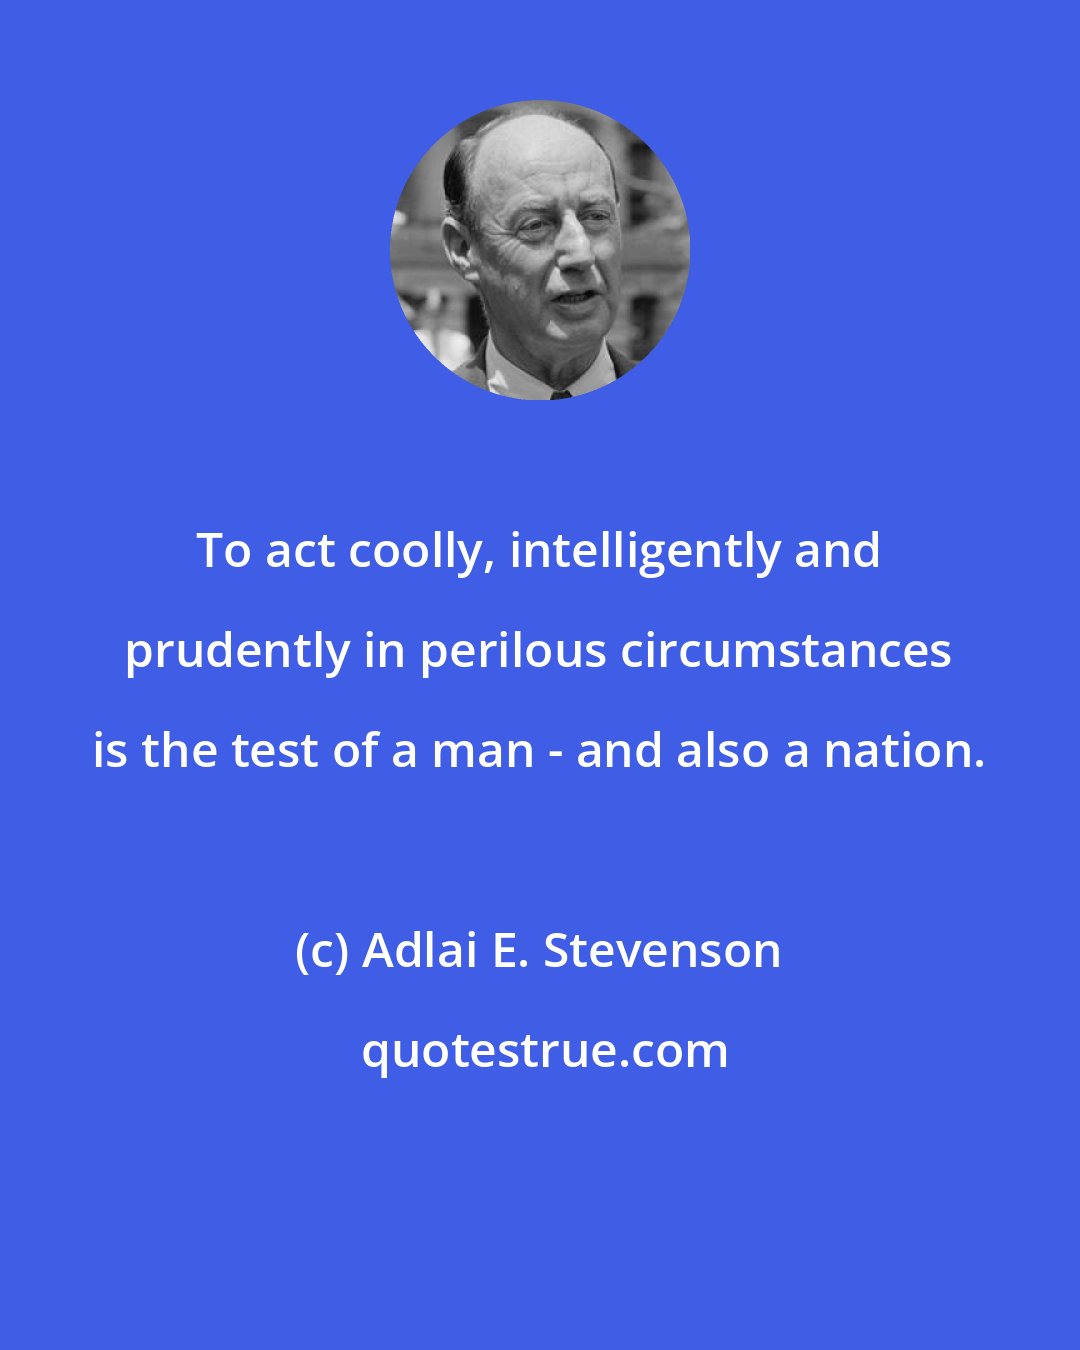 Adlai E. Stevenson: To act coolly, intelligently and prudently in perilous circumstances is the test of a man - and also a nation.